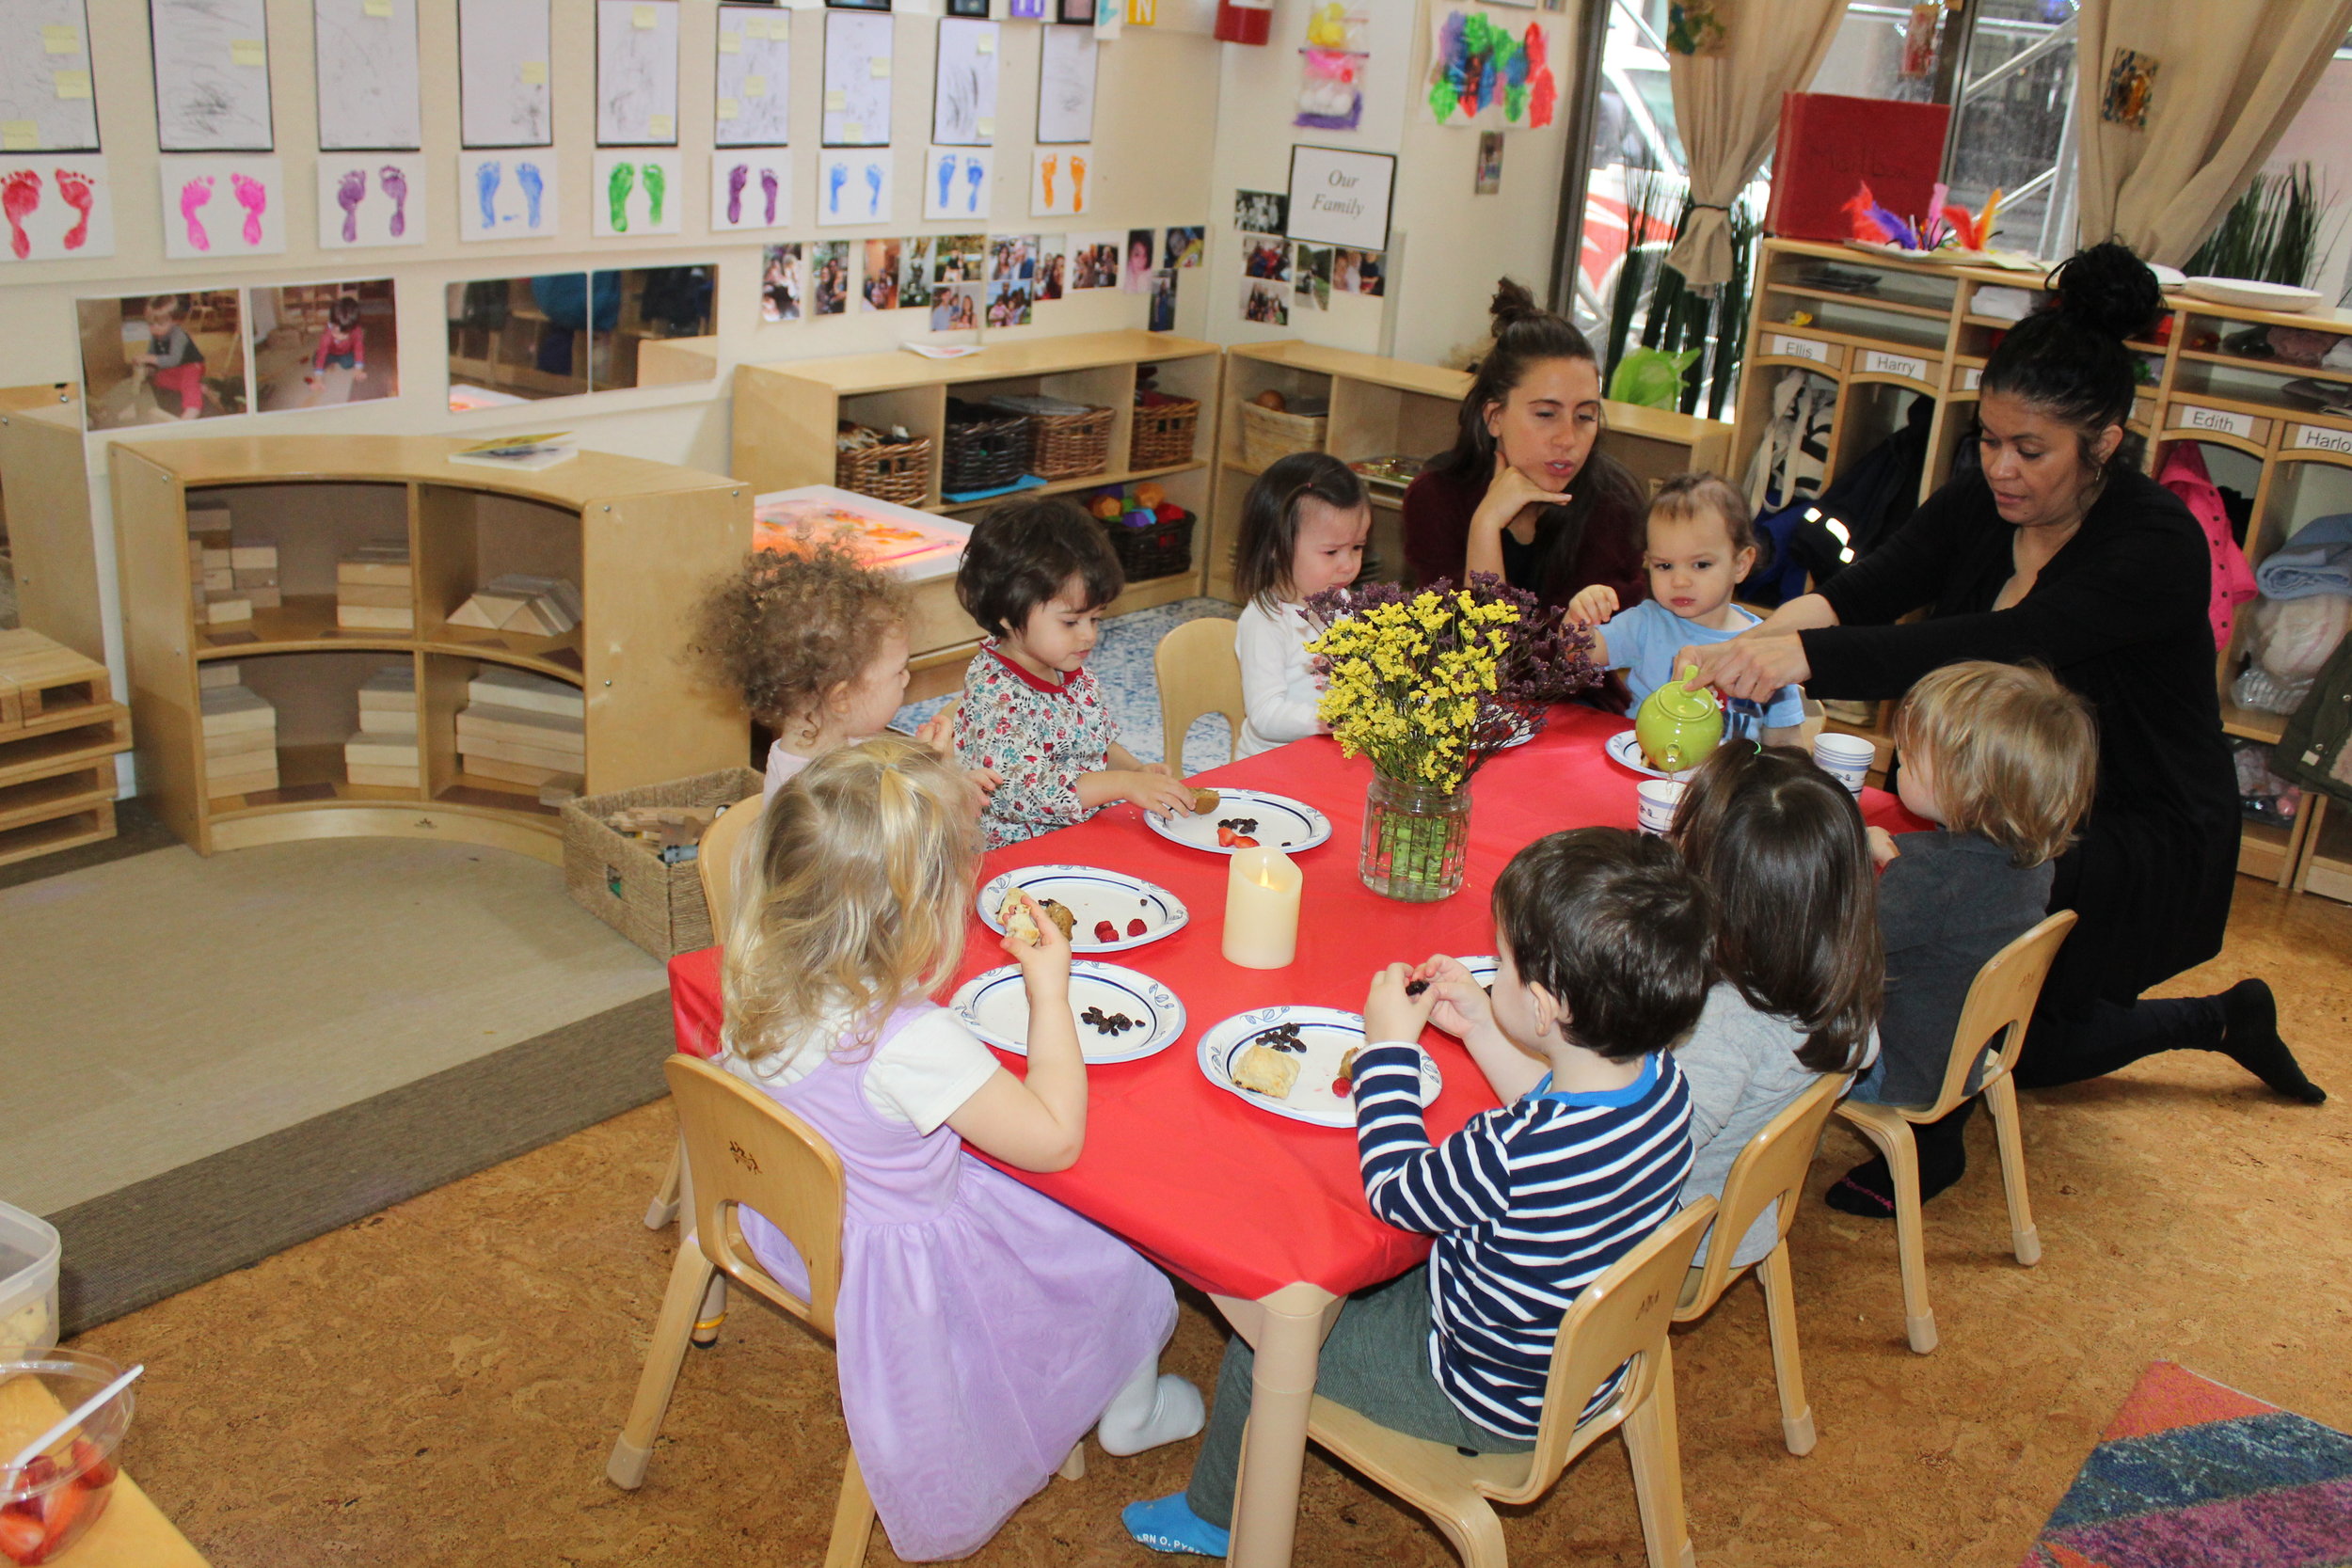     The children were eating strawberries, muffins, raisins, and cherry scones at their Tea Party. They wore their different hats as Hooray for Hats was being read to them.&nbsp; The also enjoyed a cup of apple juice served from a Teacup.&nbsp; &nbsp